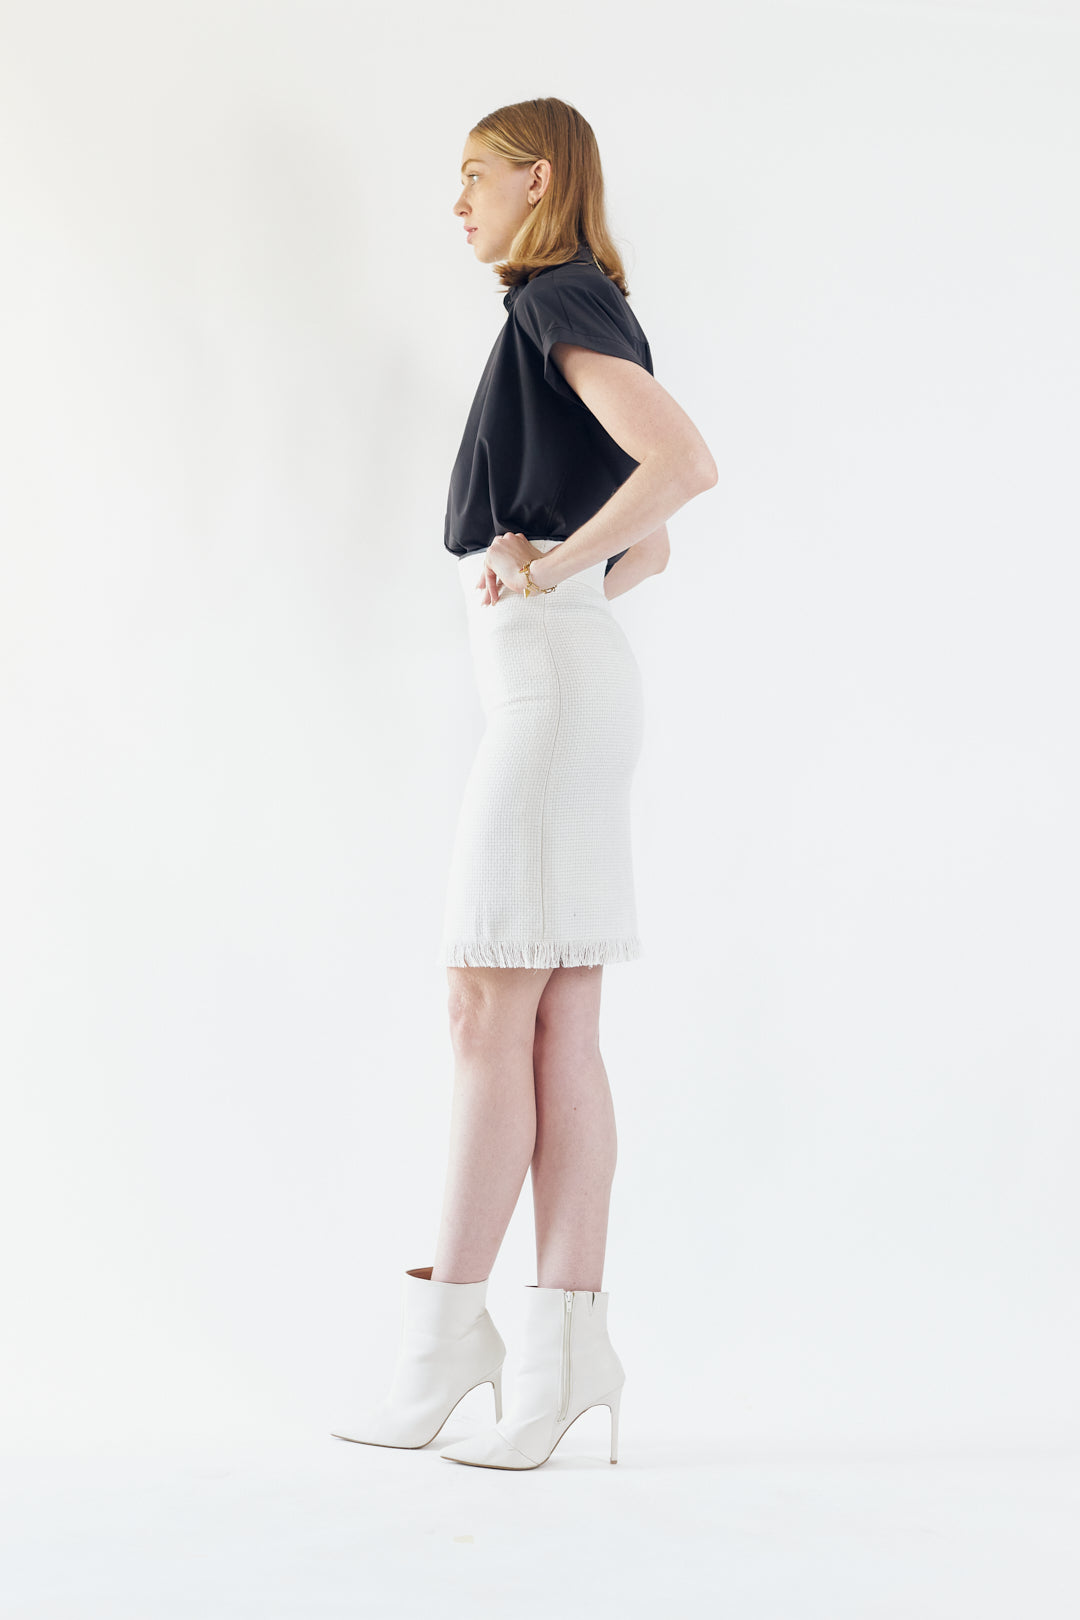 White Tweed Skirt - Unleashing the Power Woman Within